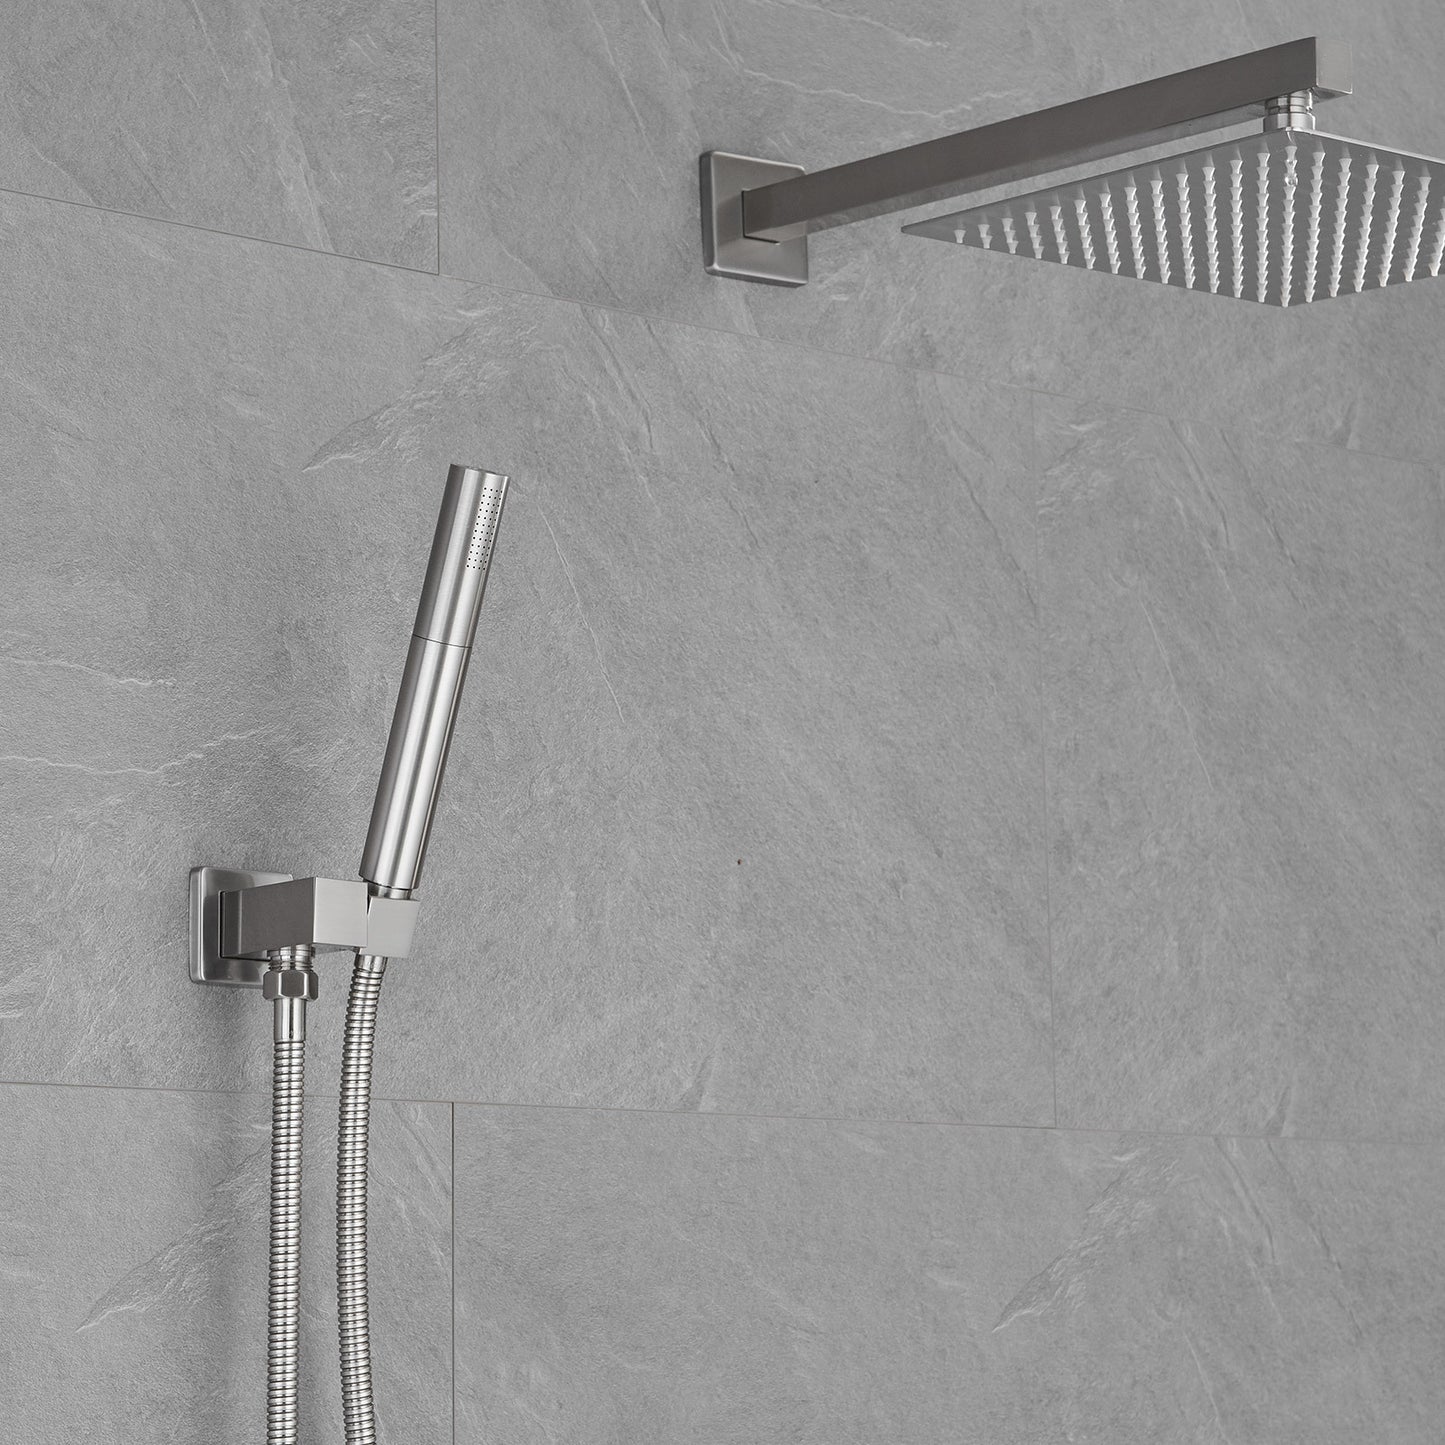 Full Coverage 2-Handle Brushed Nickel Shower System with Handheld Shower Kit